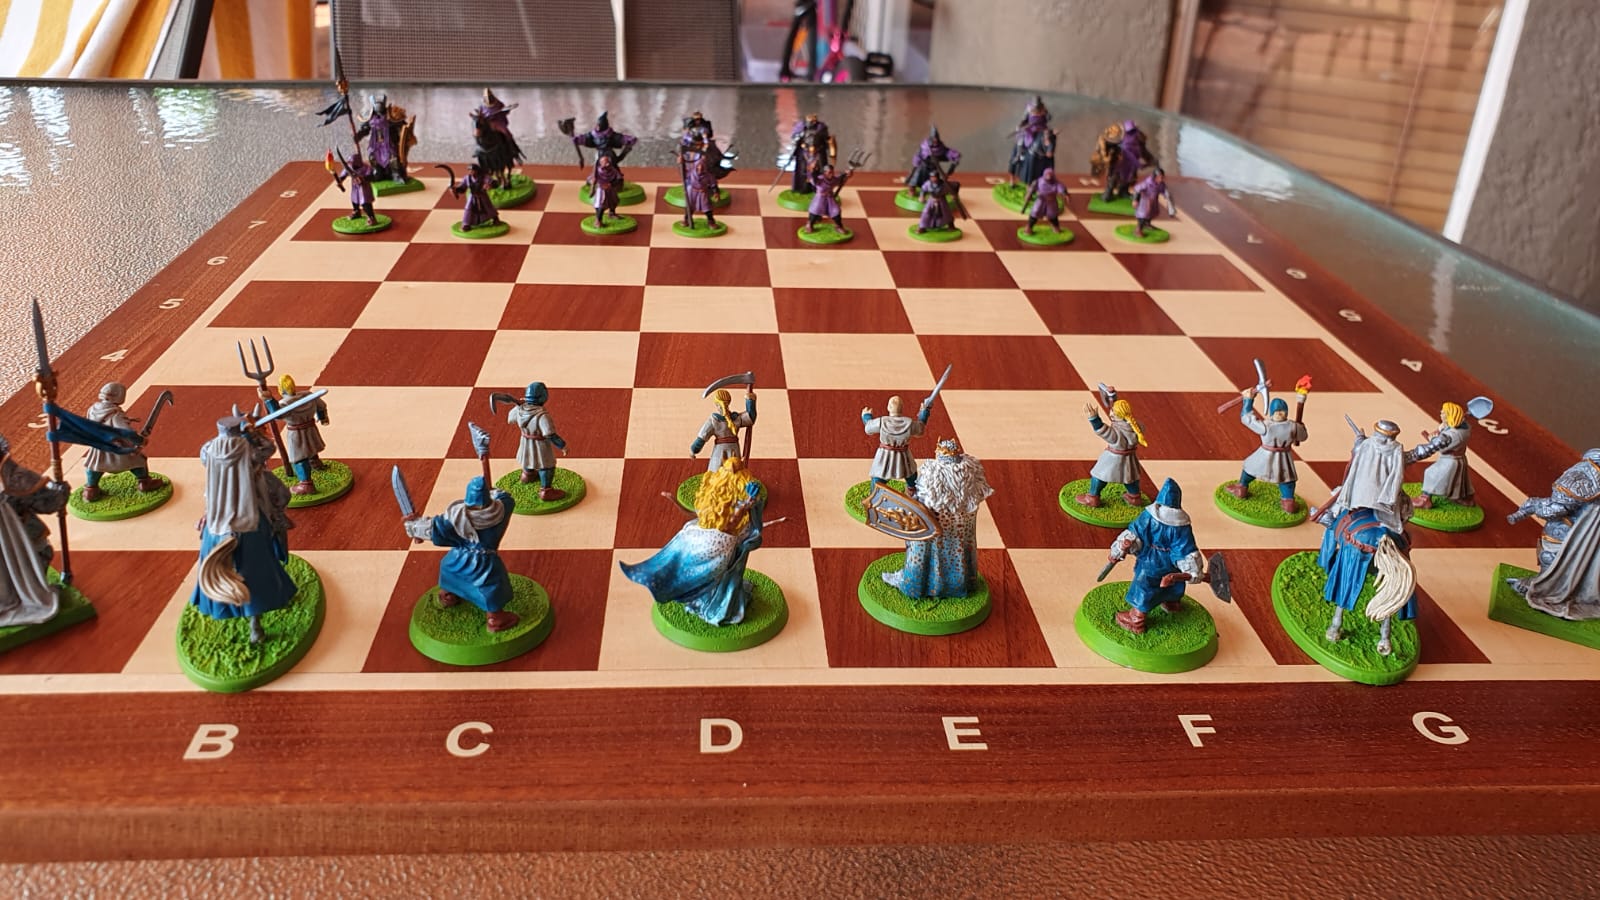 Chess set with double head rooks - Chess Forums 